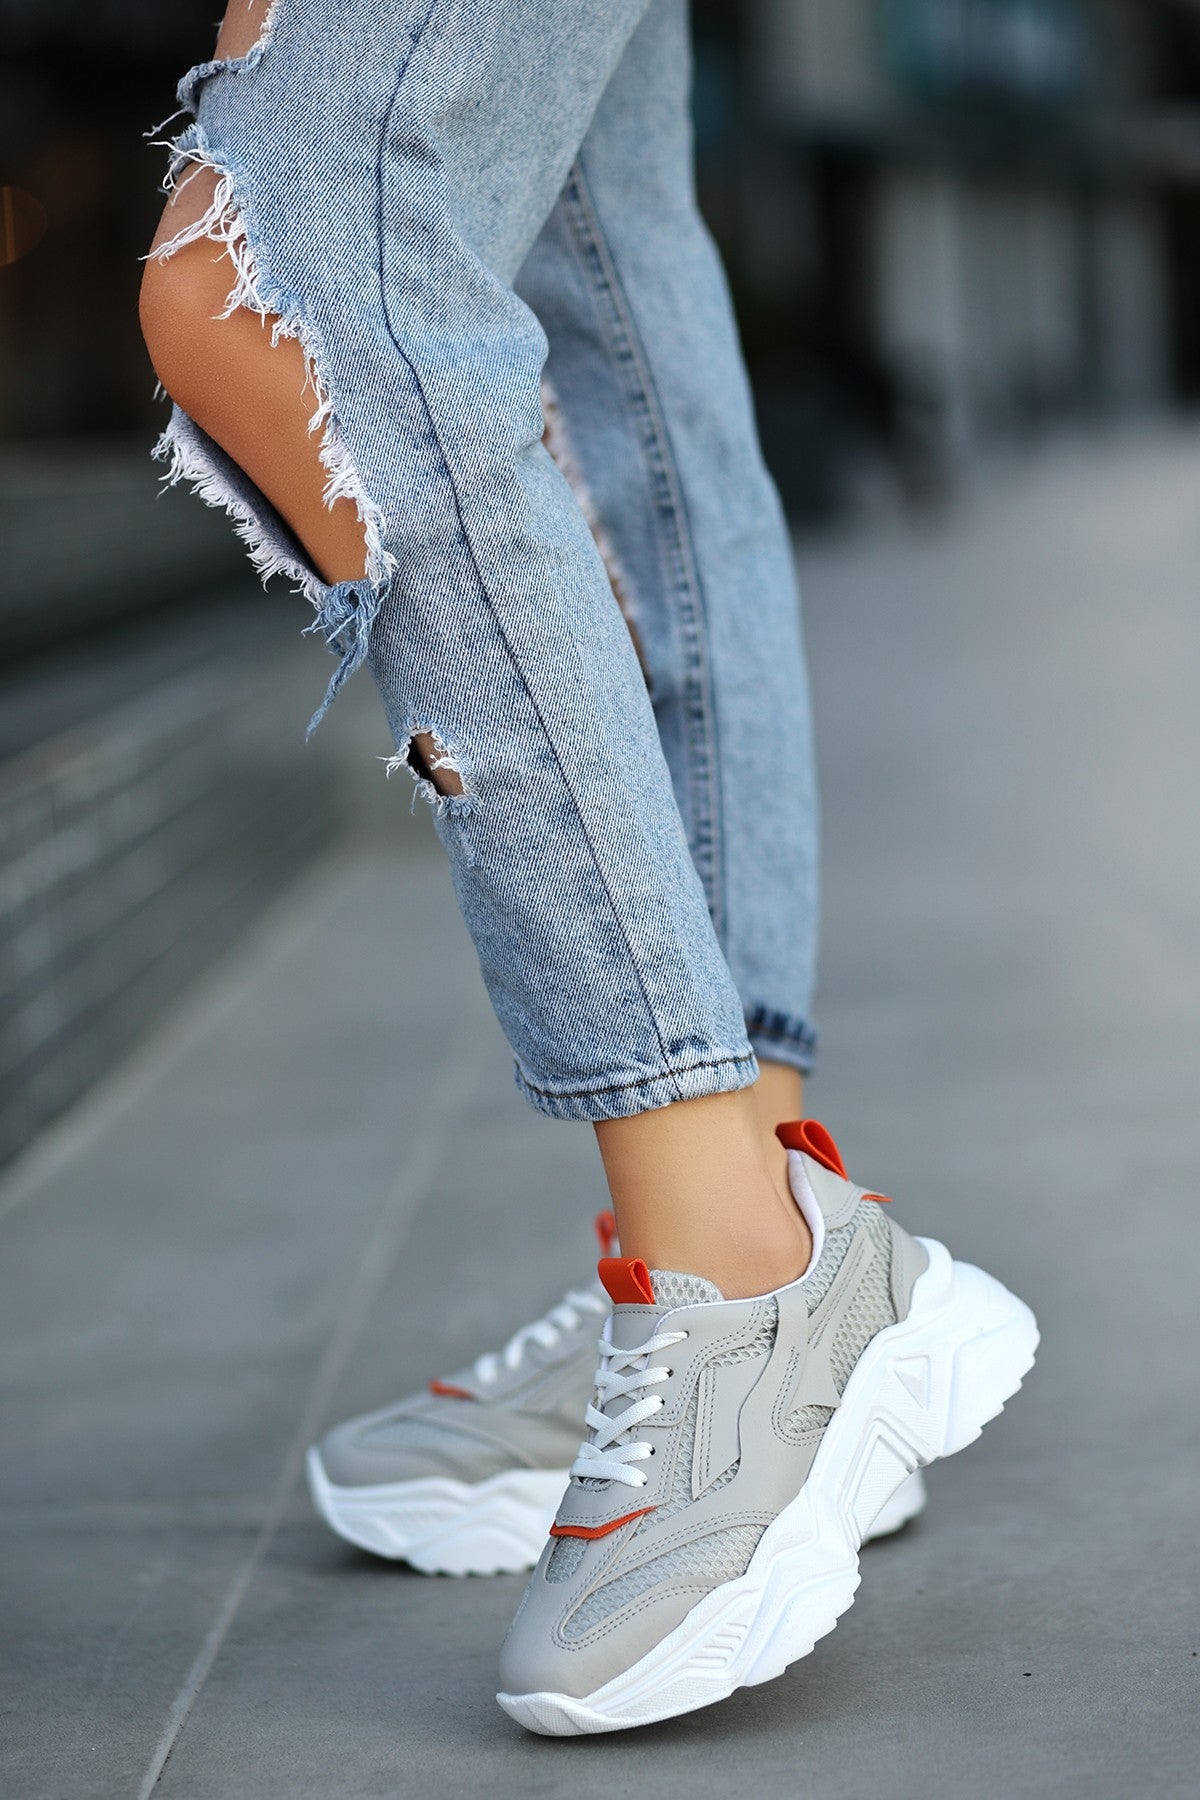 Women's Gray Leather Lace-Up Sports Shoes - STREETMODE ™